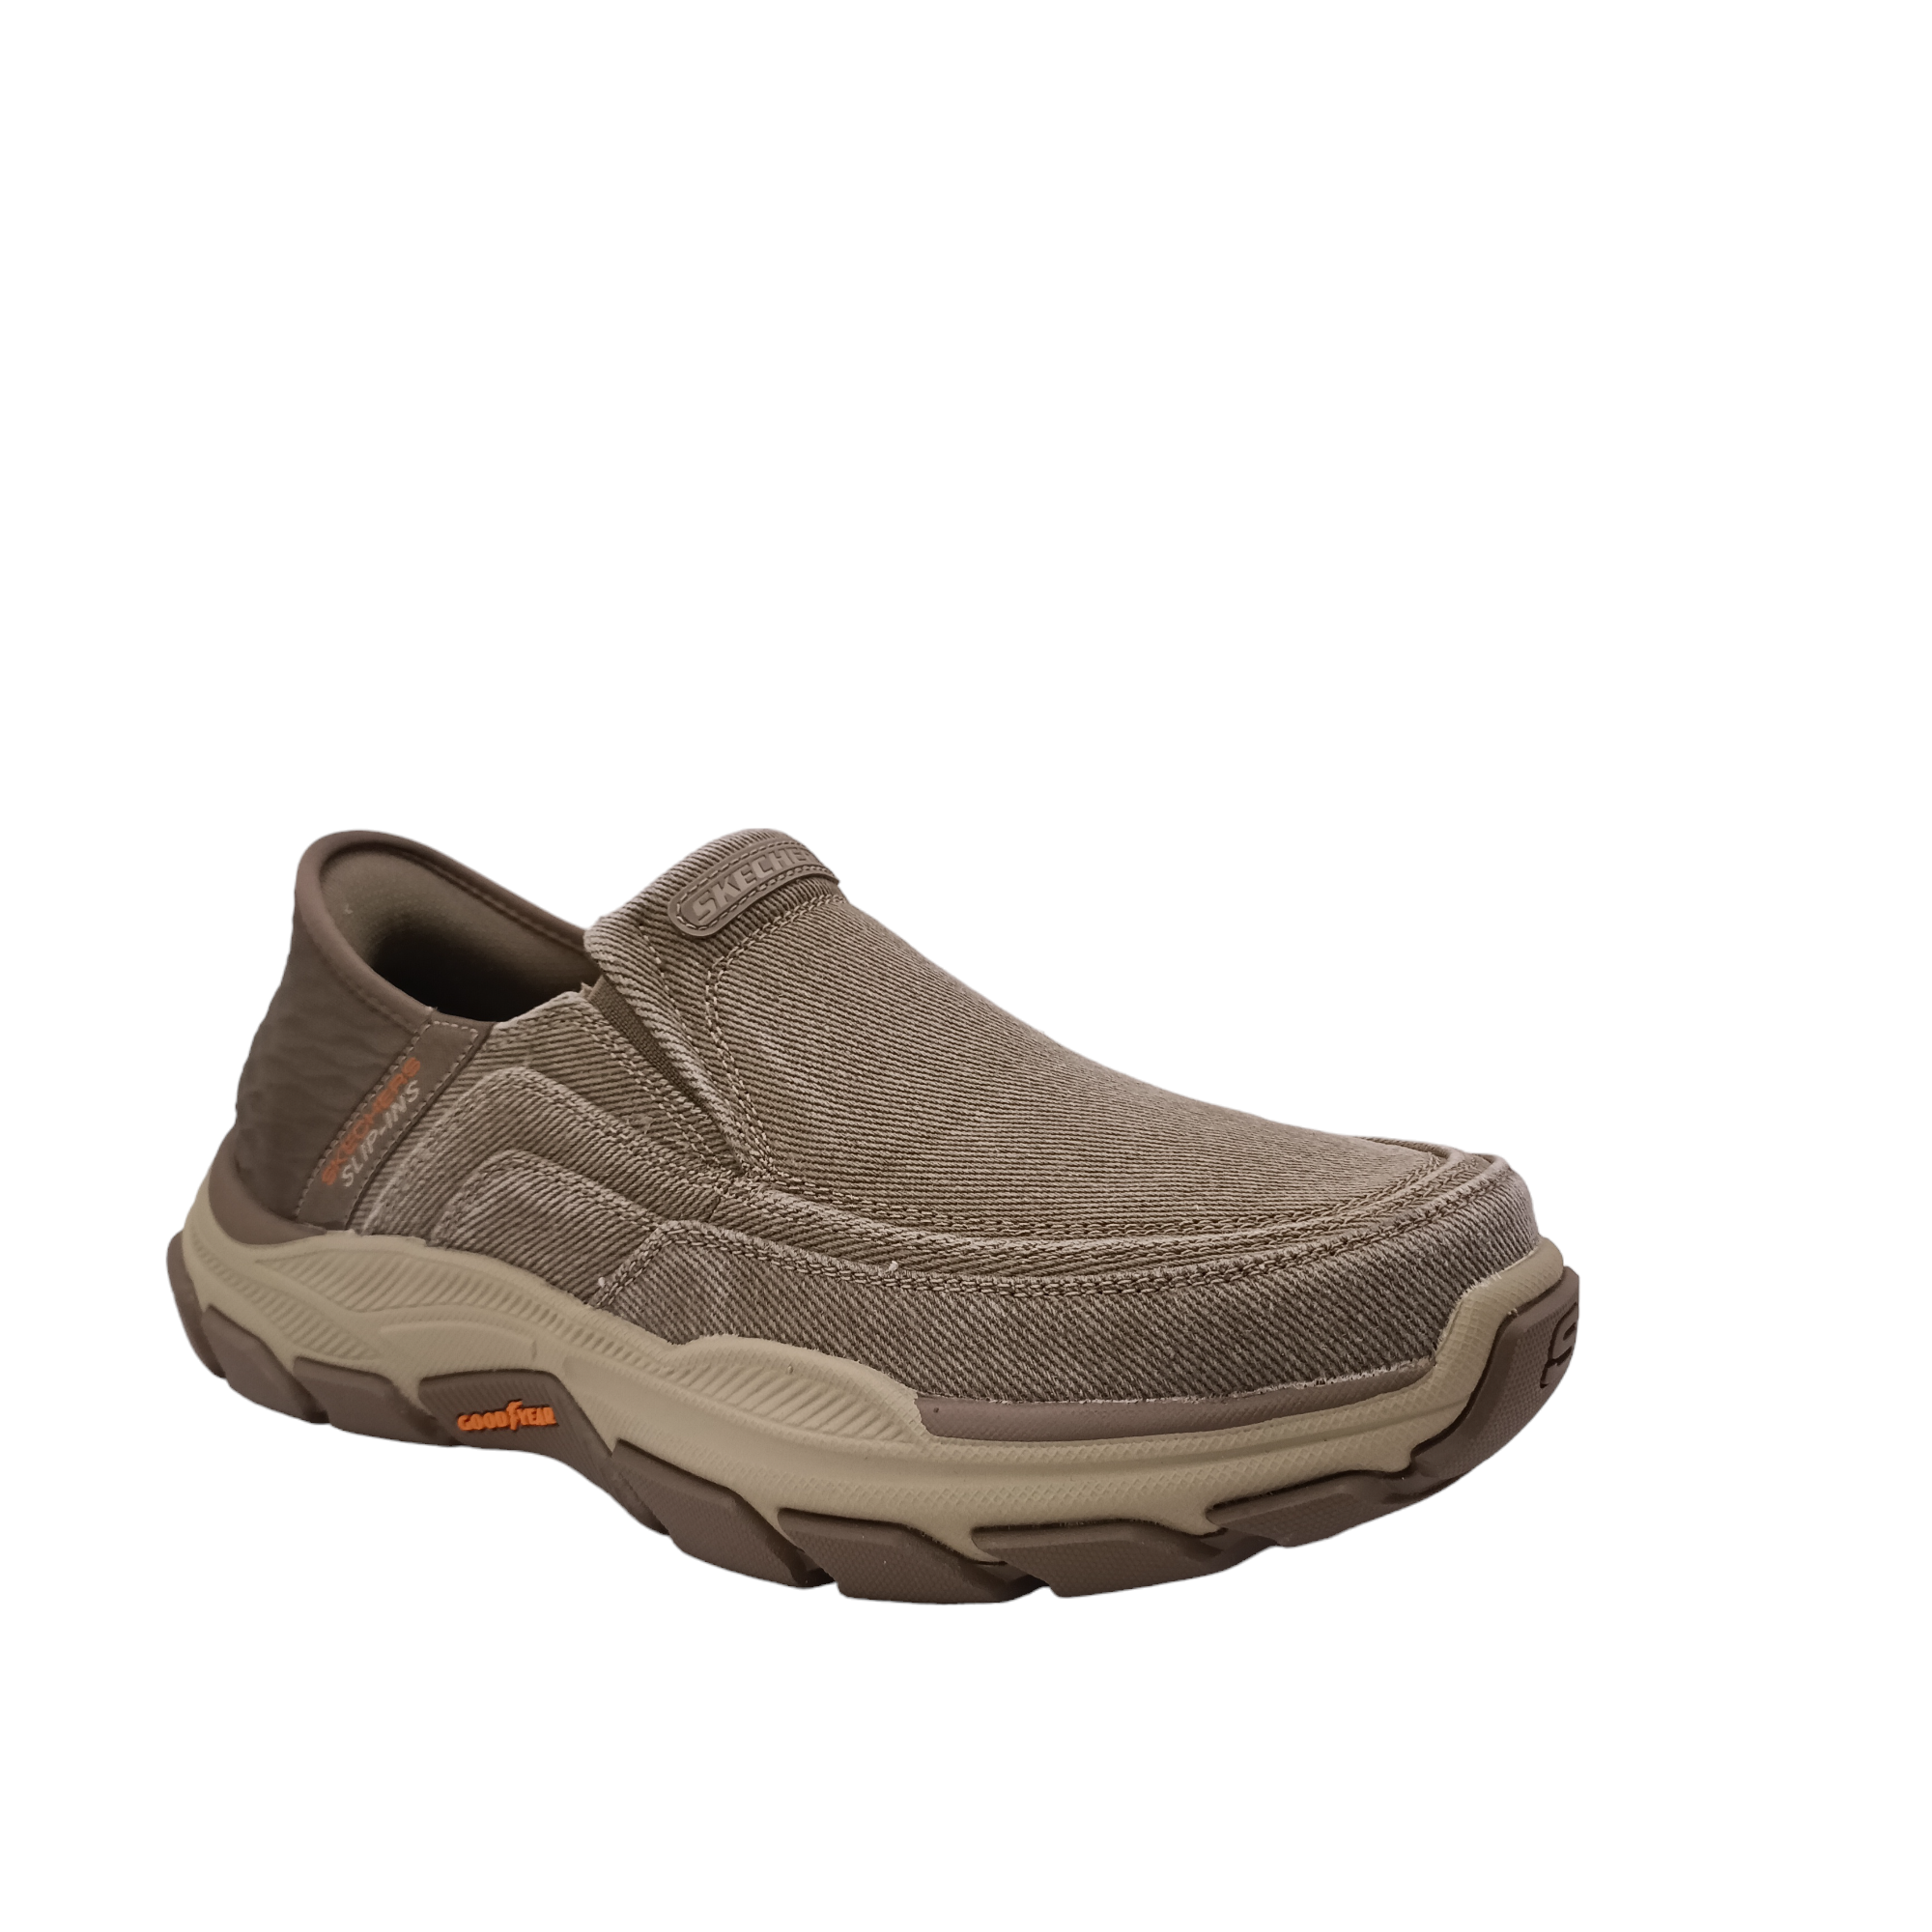 Holmgren from Skechers. Side angled view of shoe with slip-in technology on the heel, a firm and cushioned heel for easy entry without hands. Rugged looked sole with a synthetic upper with visible stitching. Wide fitting with two small external gussets. Shop Online and in-store with shoe&me Mount Maunganui Tauranga